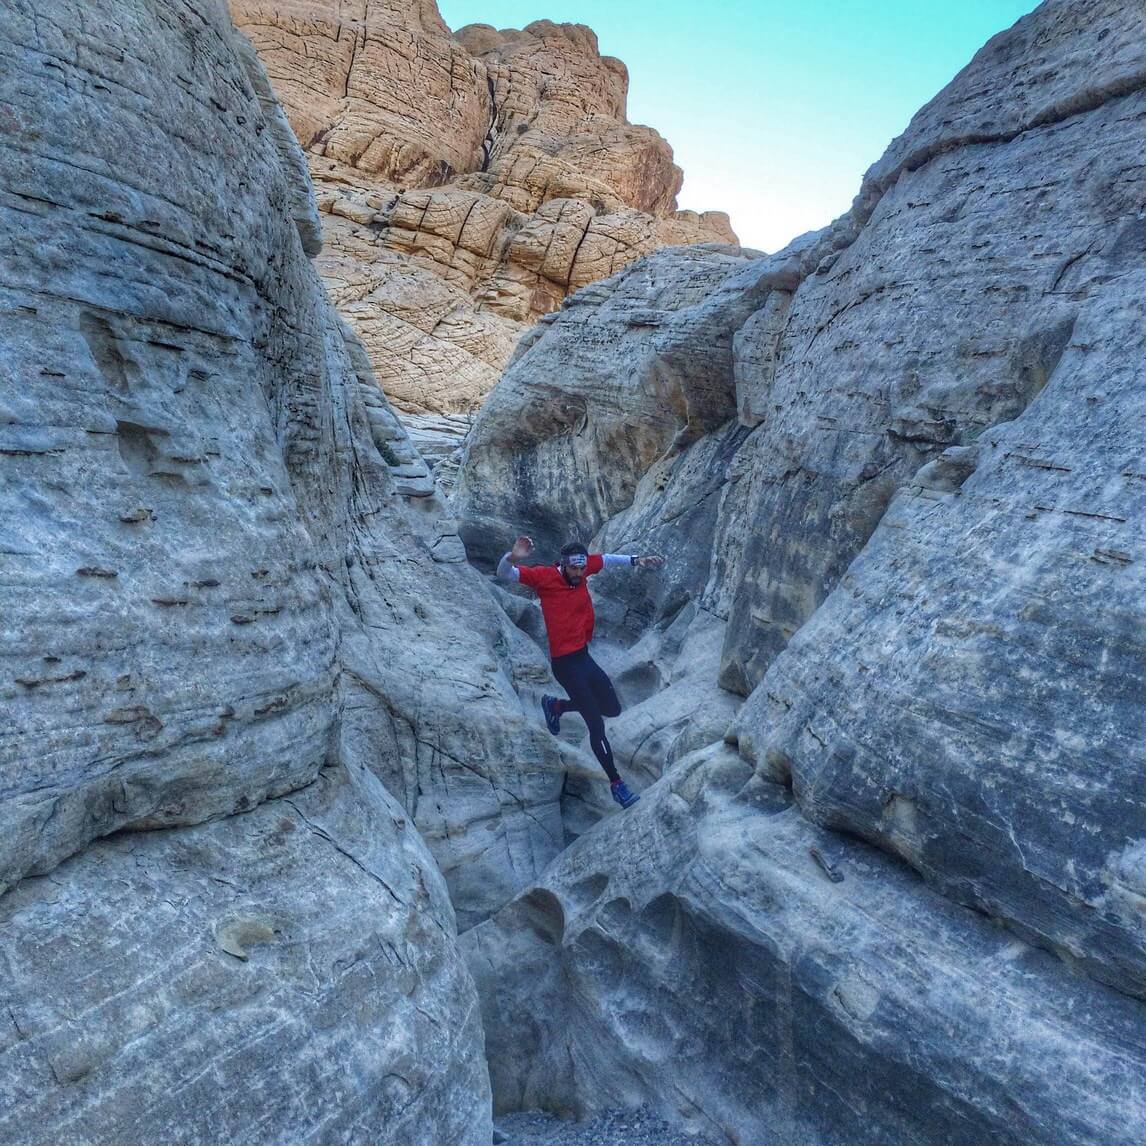 Leaping Through a Slot Canyon